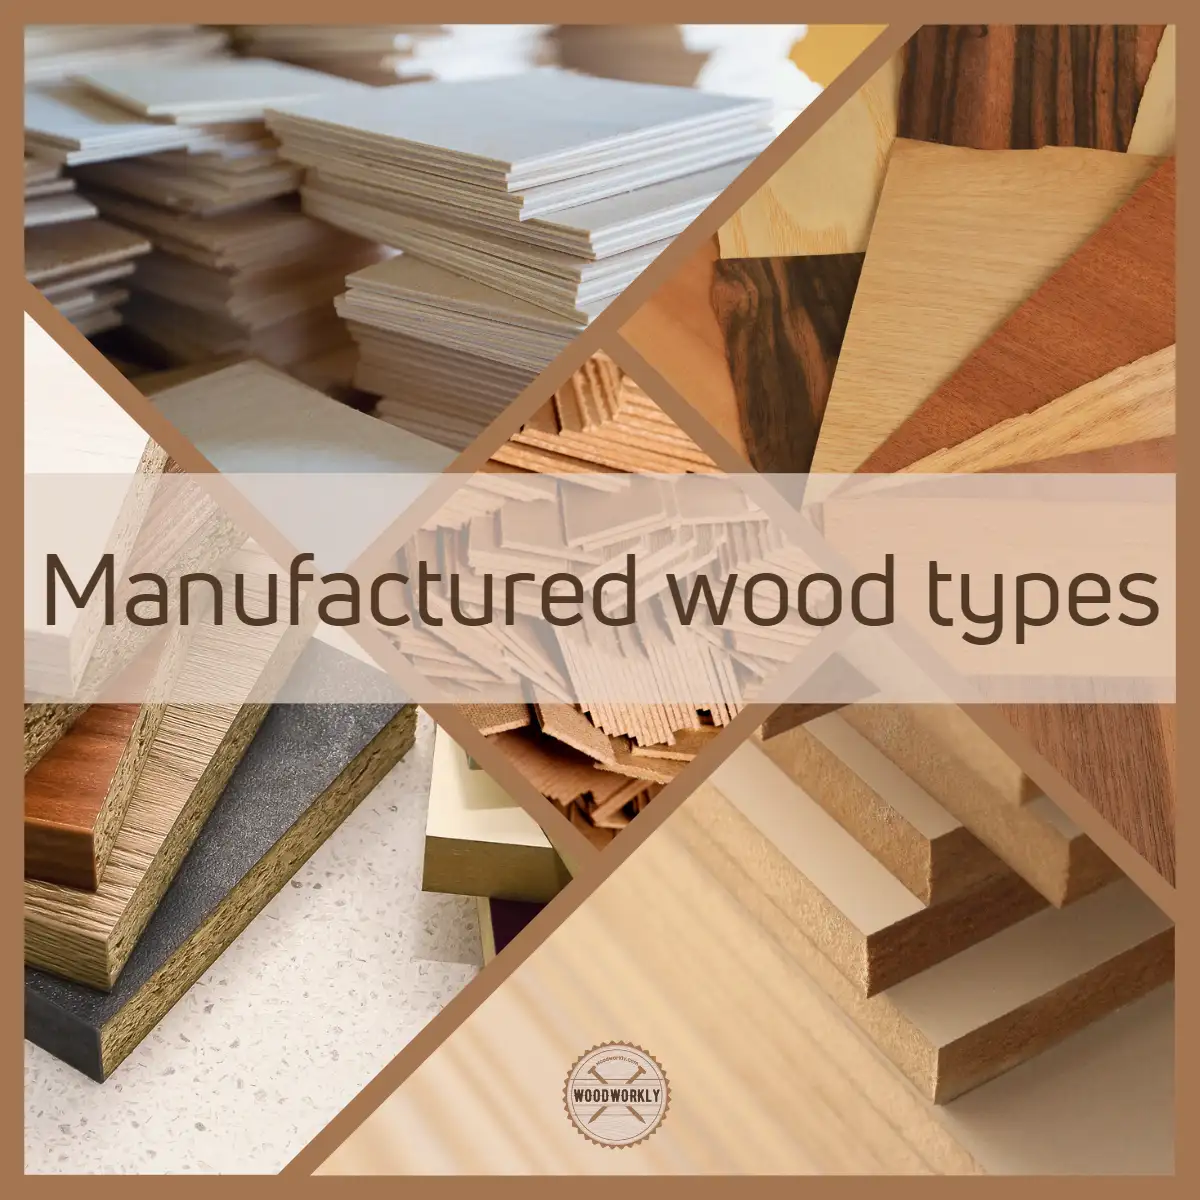 Manufactured wood types